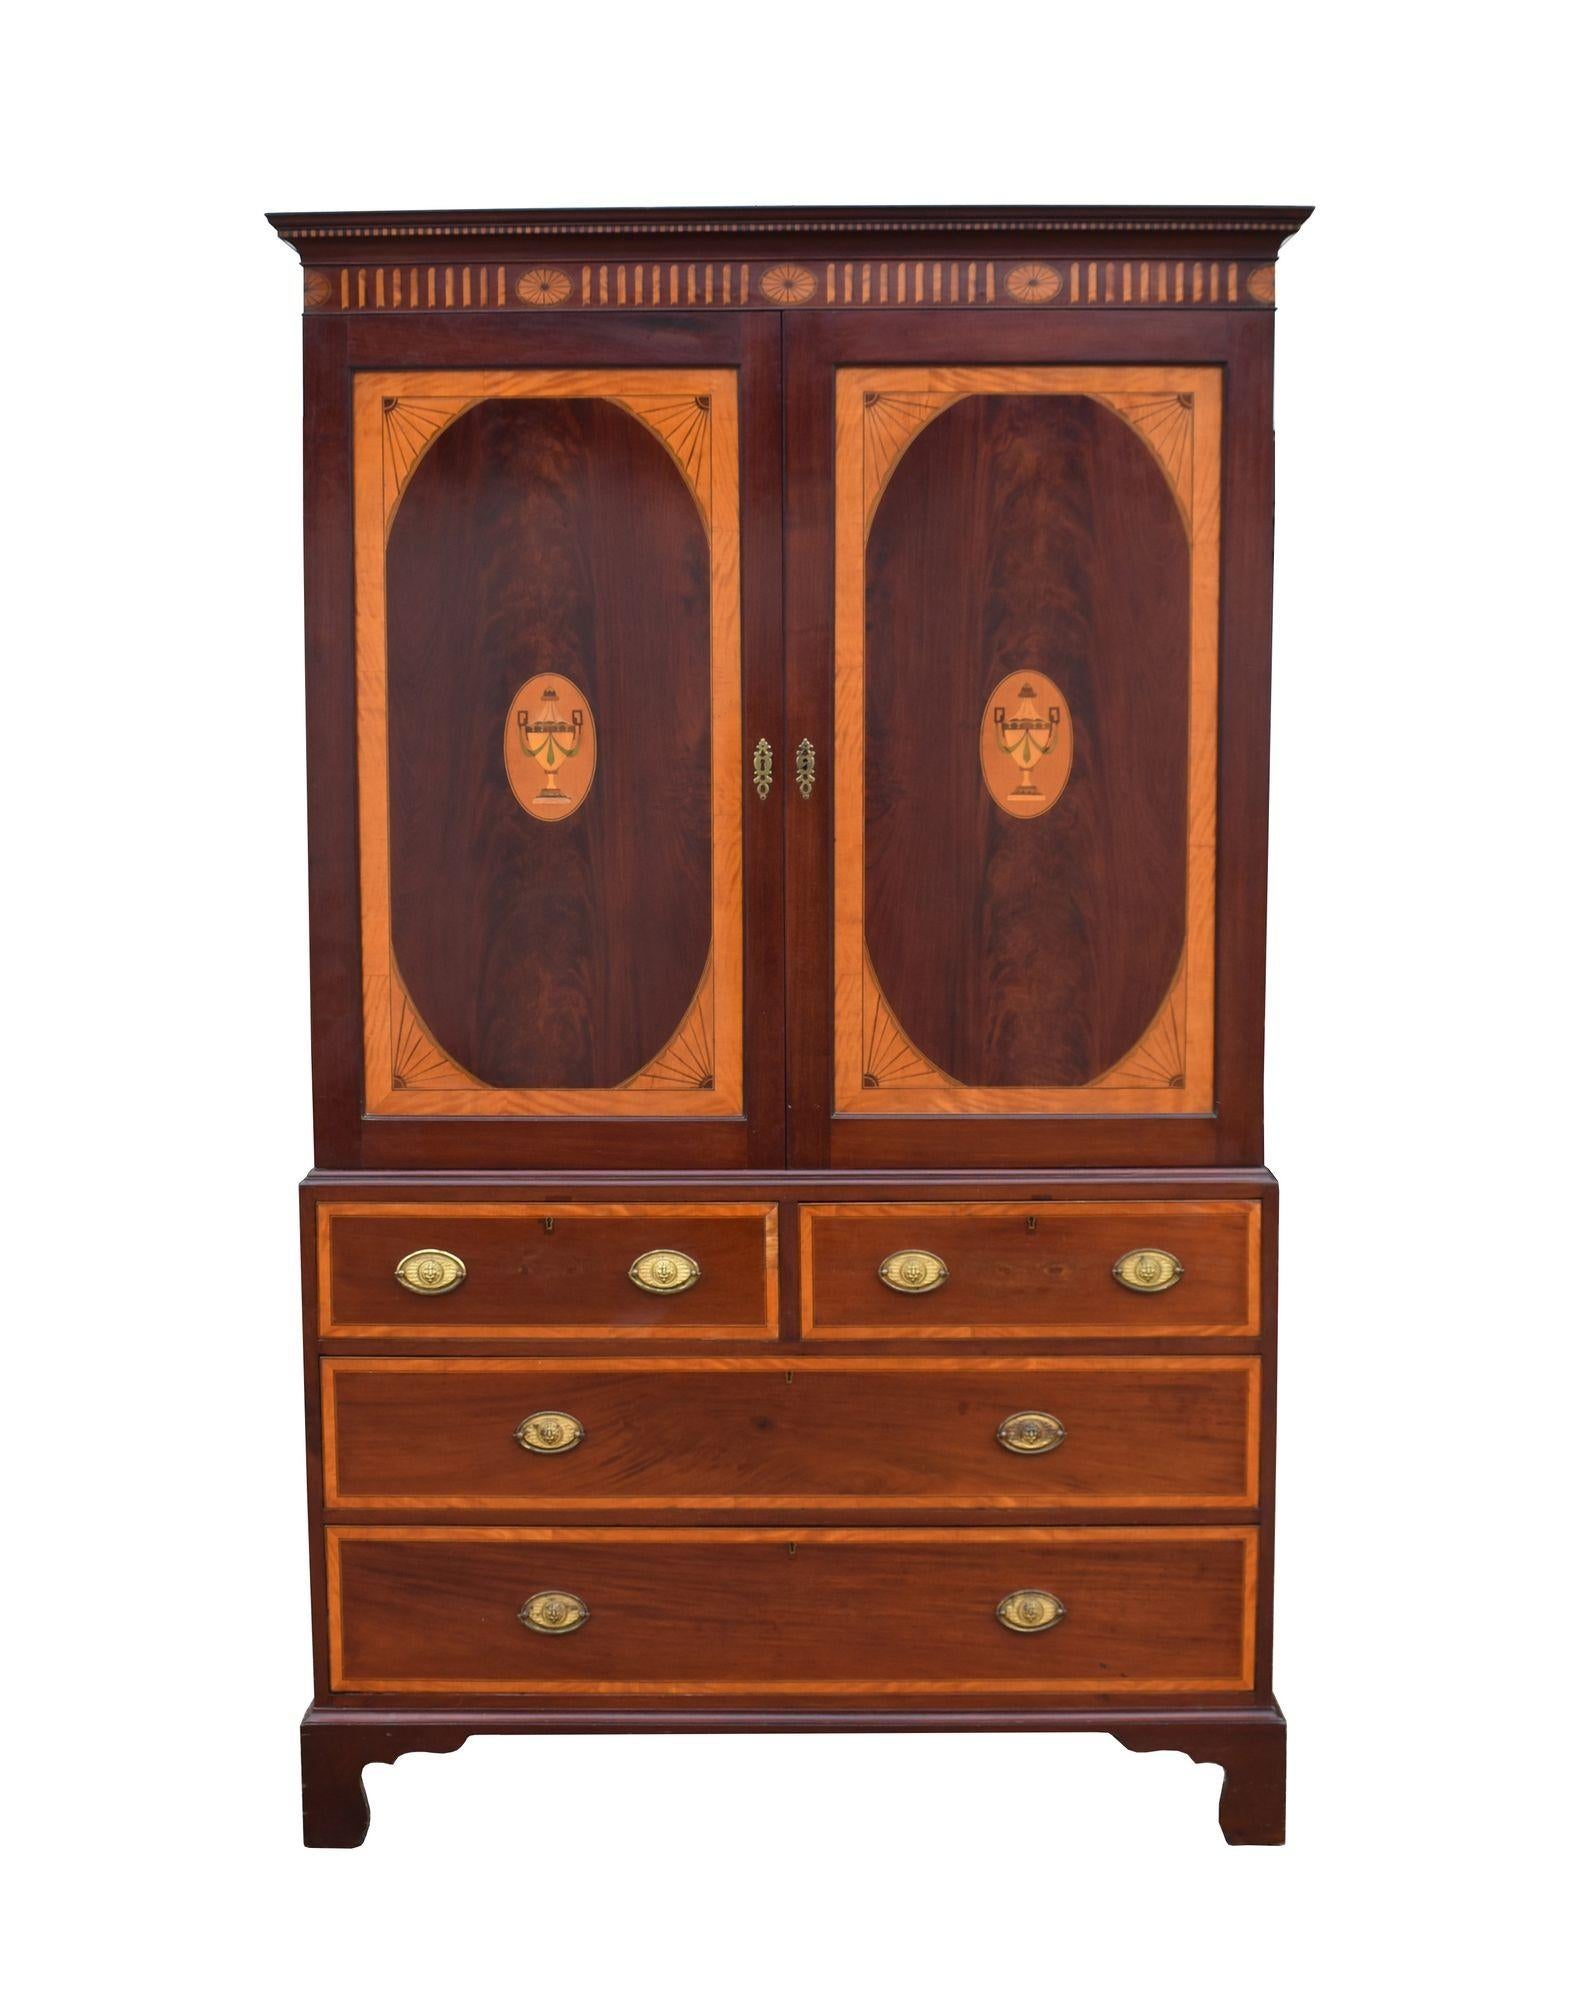 For sale is a good quality Victorian Irish Sheraton style inlaid mahogany linen press, having an inlaid pediment over two inlaid doors, opening to reveal three sliding trays. Below this, the linen press has an arrangement of four drawers, raised on